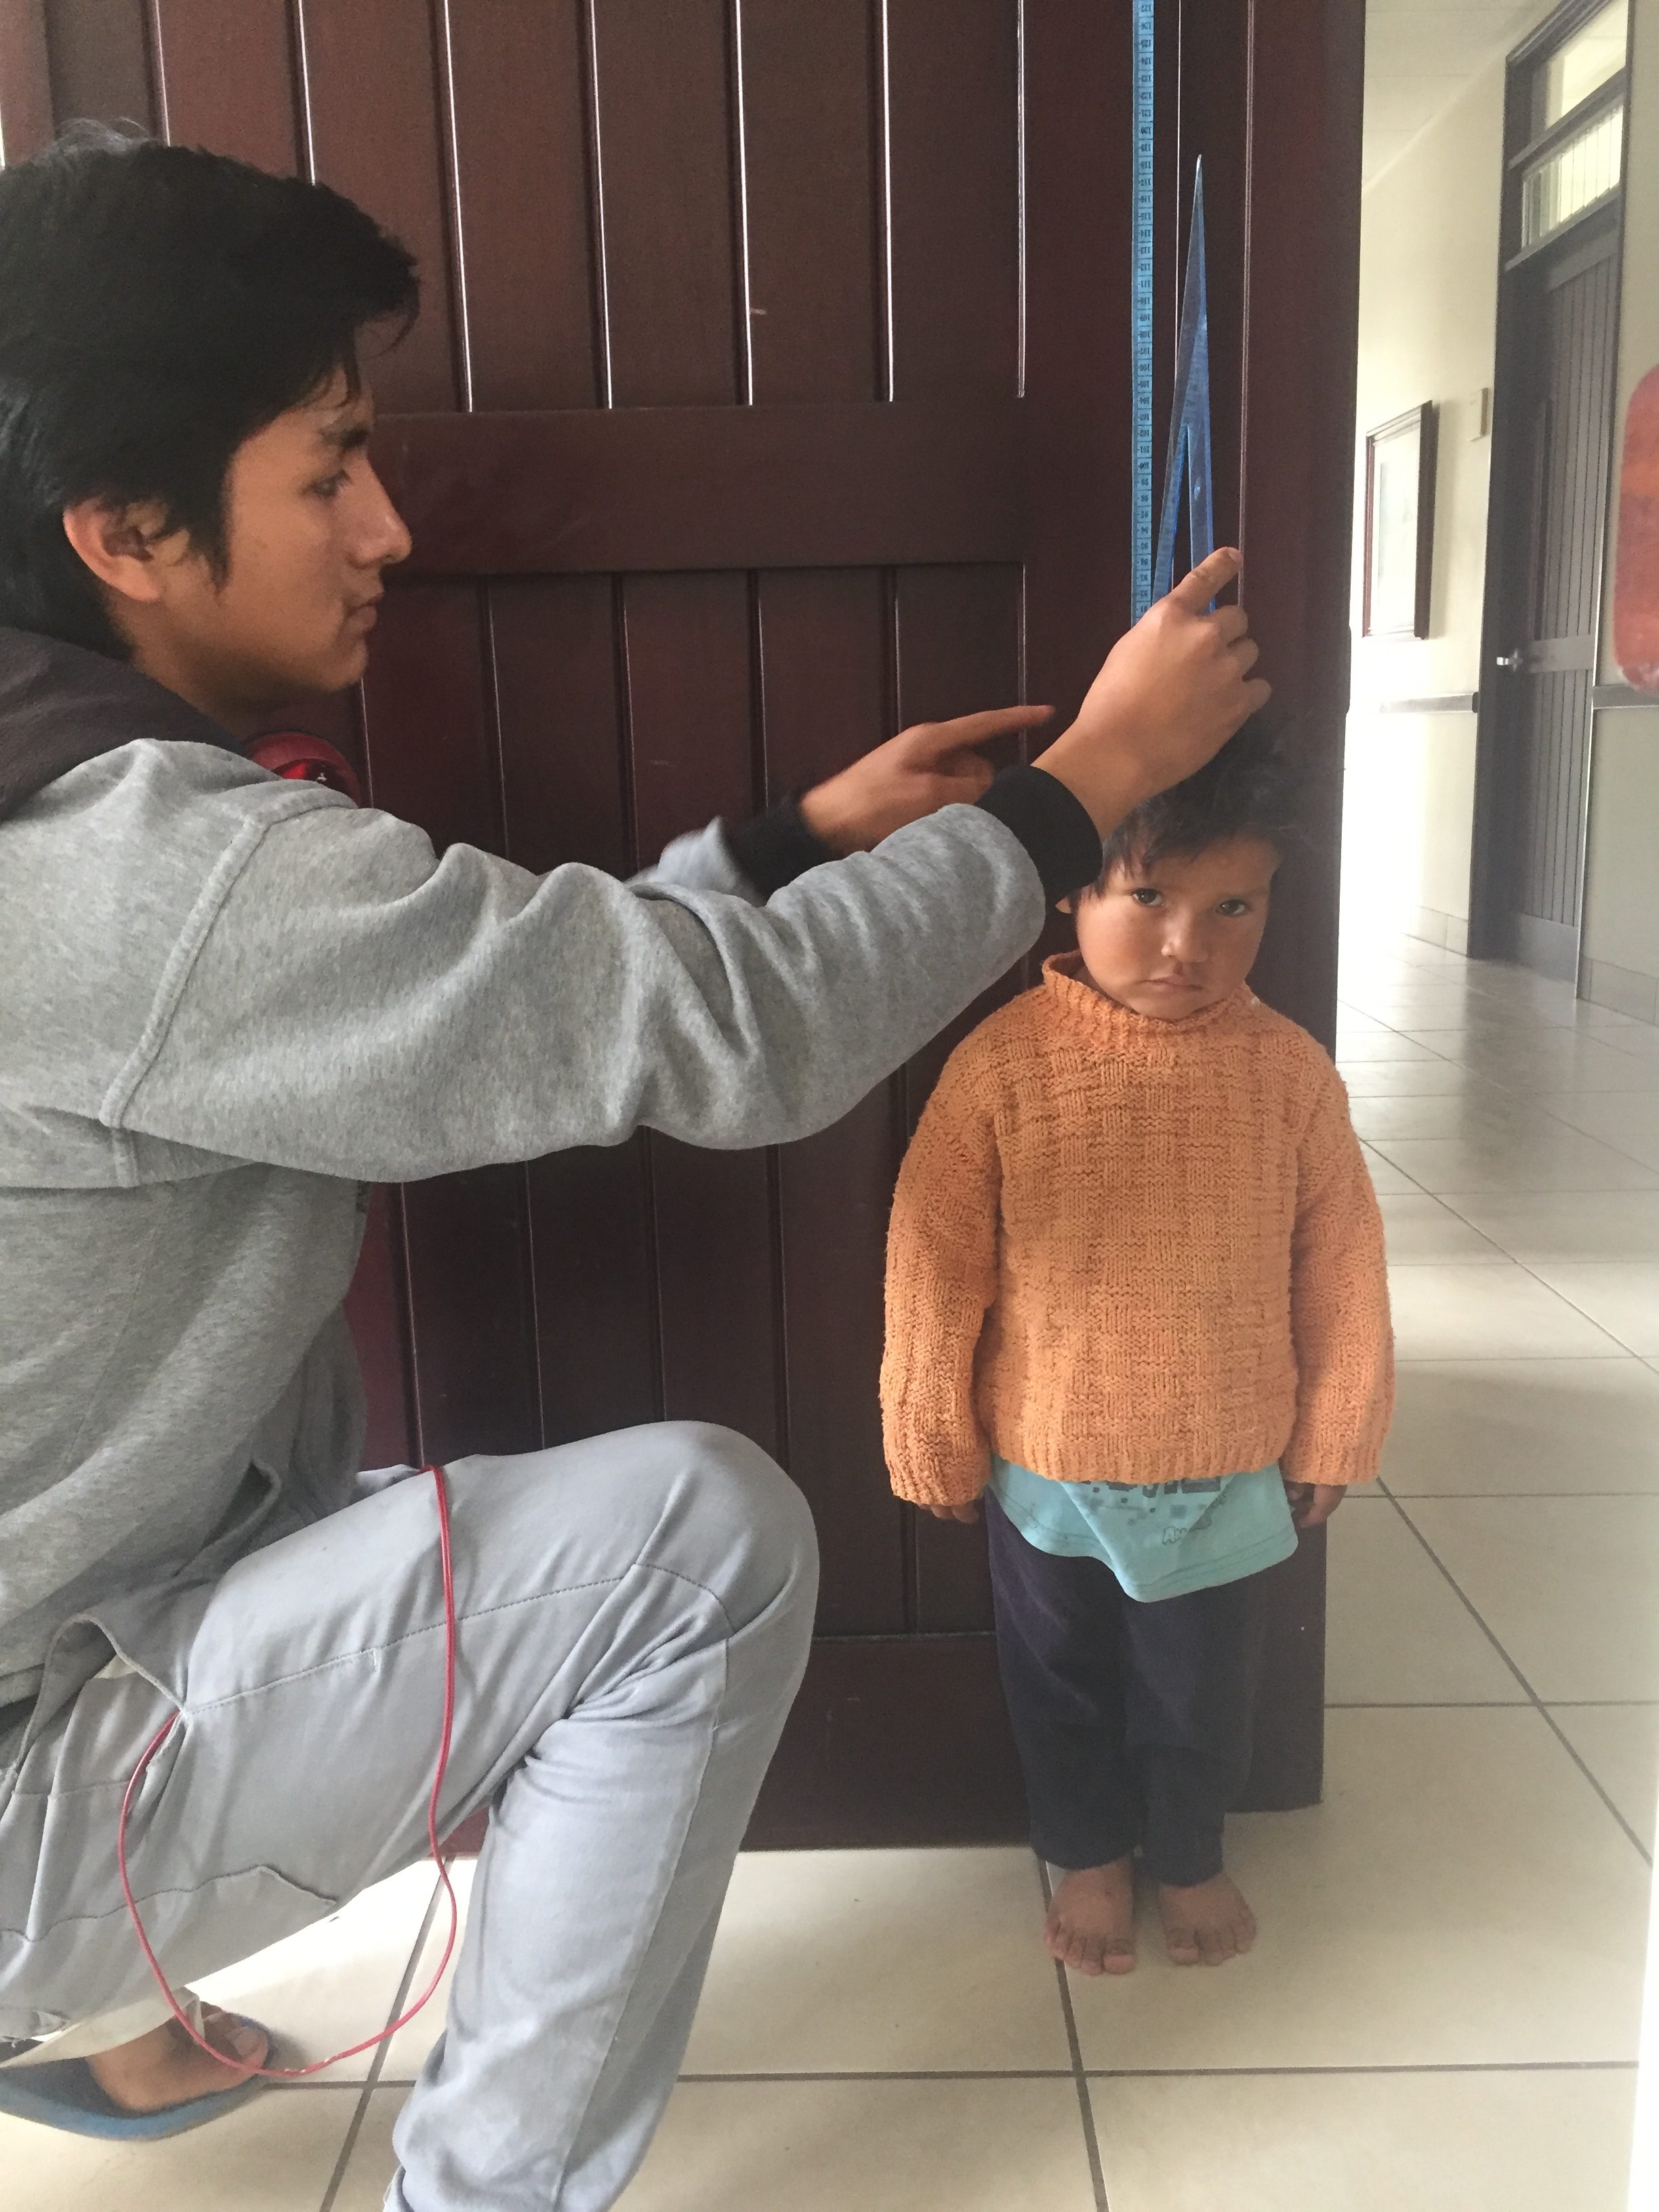 Urubamba-screening-young-man-preparing-for-a-mission-measures-a-boy